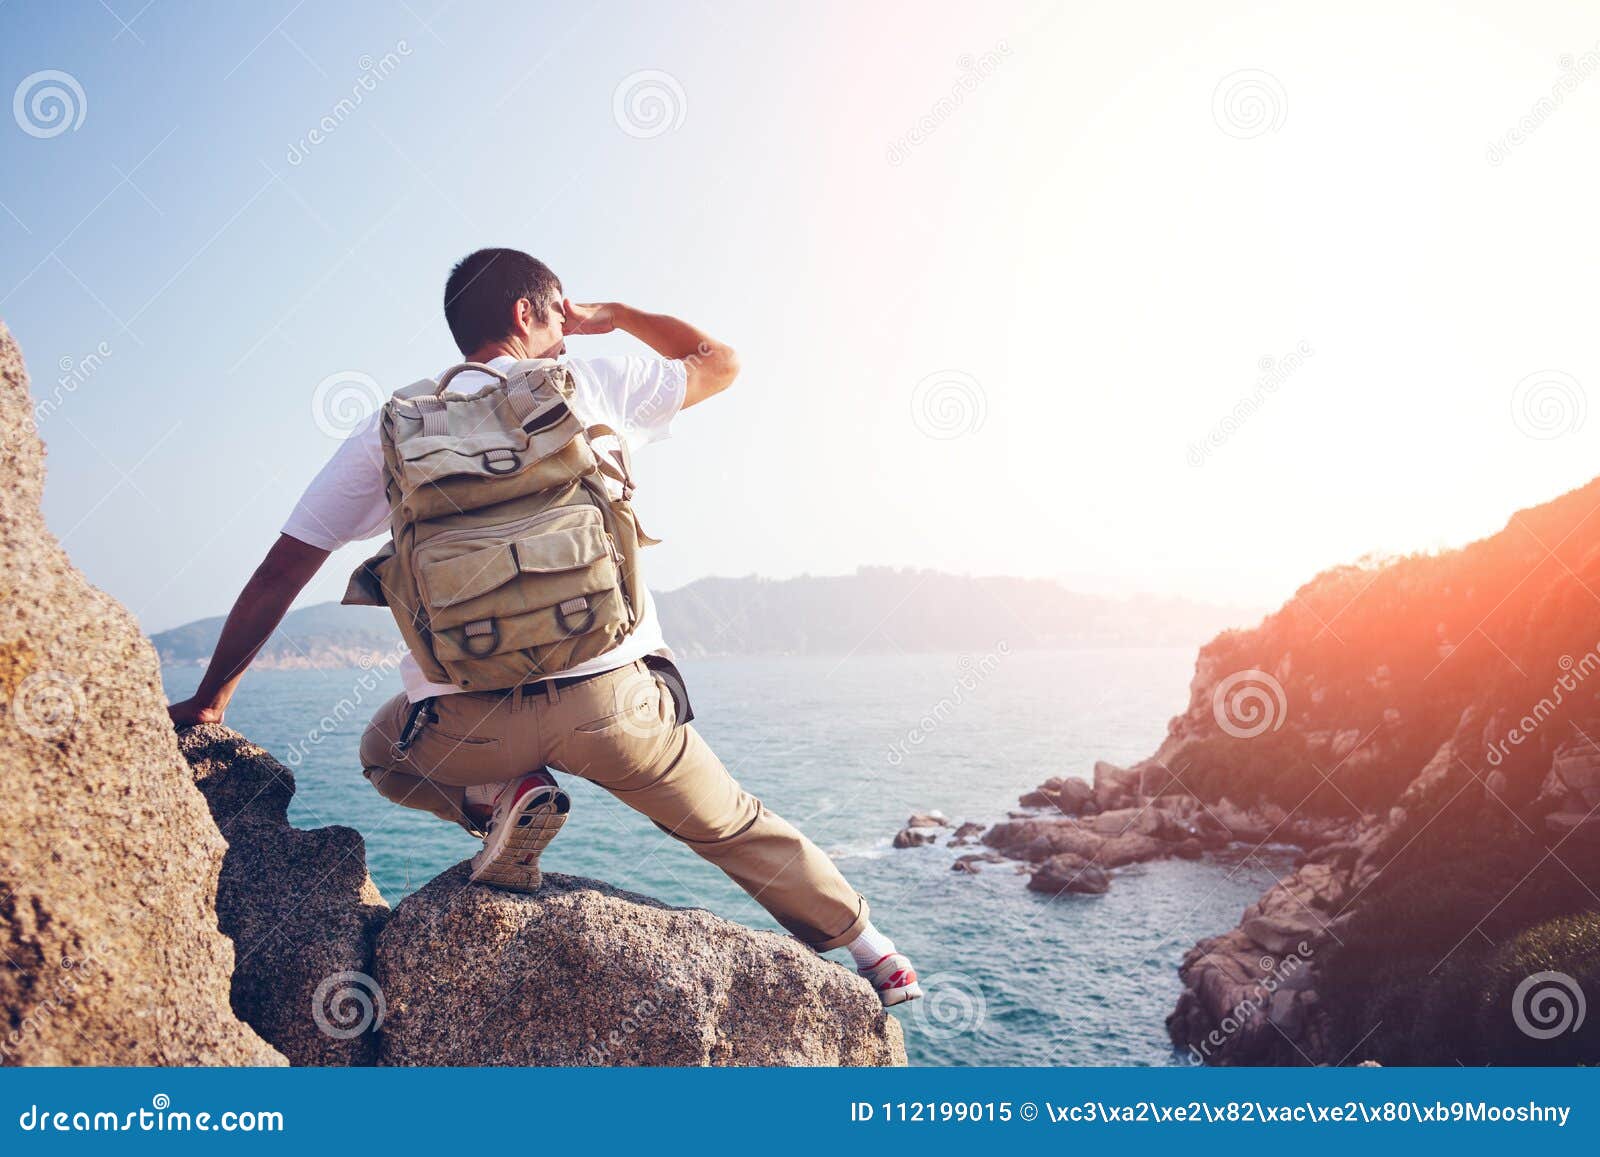 Young Adventure Man on Rocks Above the Ocean Stock Image - Image travel, adventure: 112199015